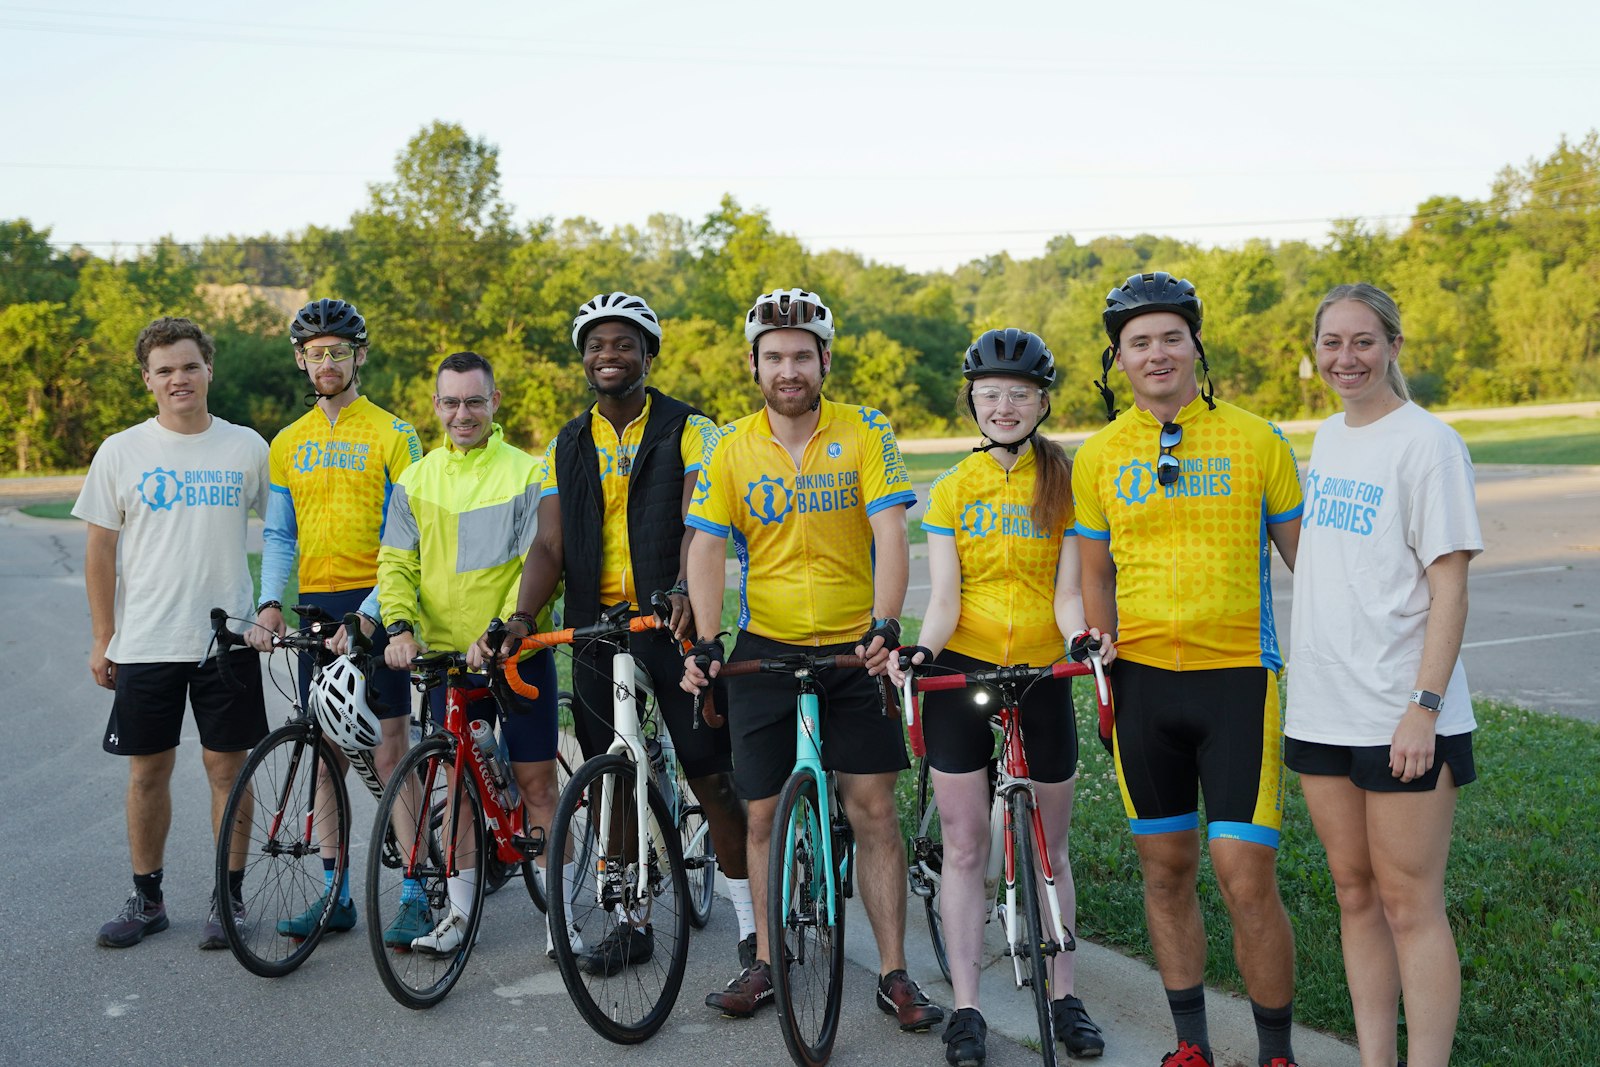 The Biking for Babies Michigan route team poses for a picture before beginning their  659.3-mile trek from Plymouth, Michigan, to Manchester, Missouri.